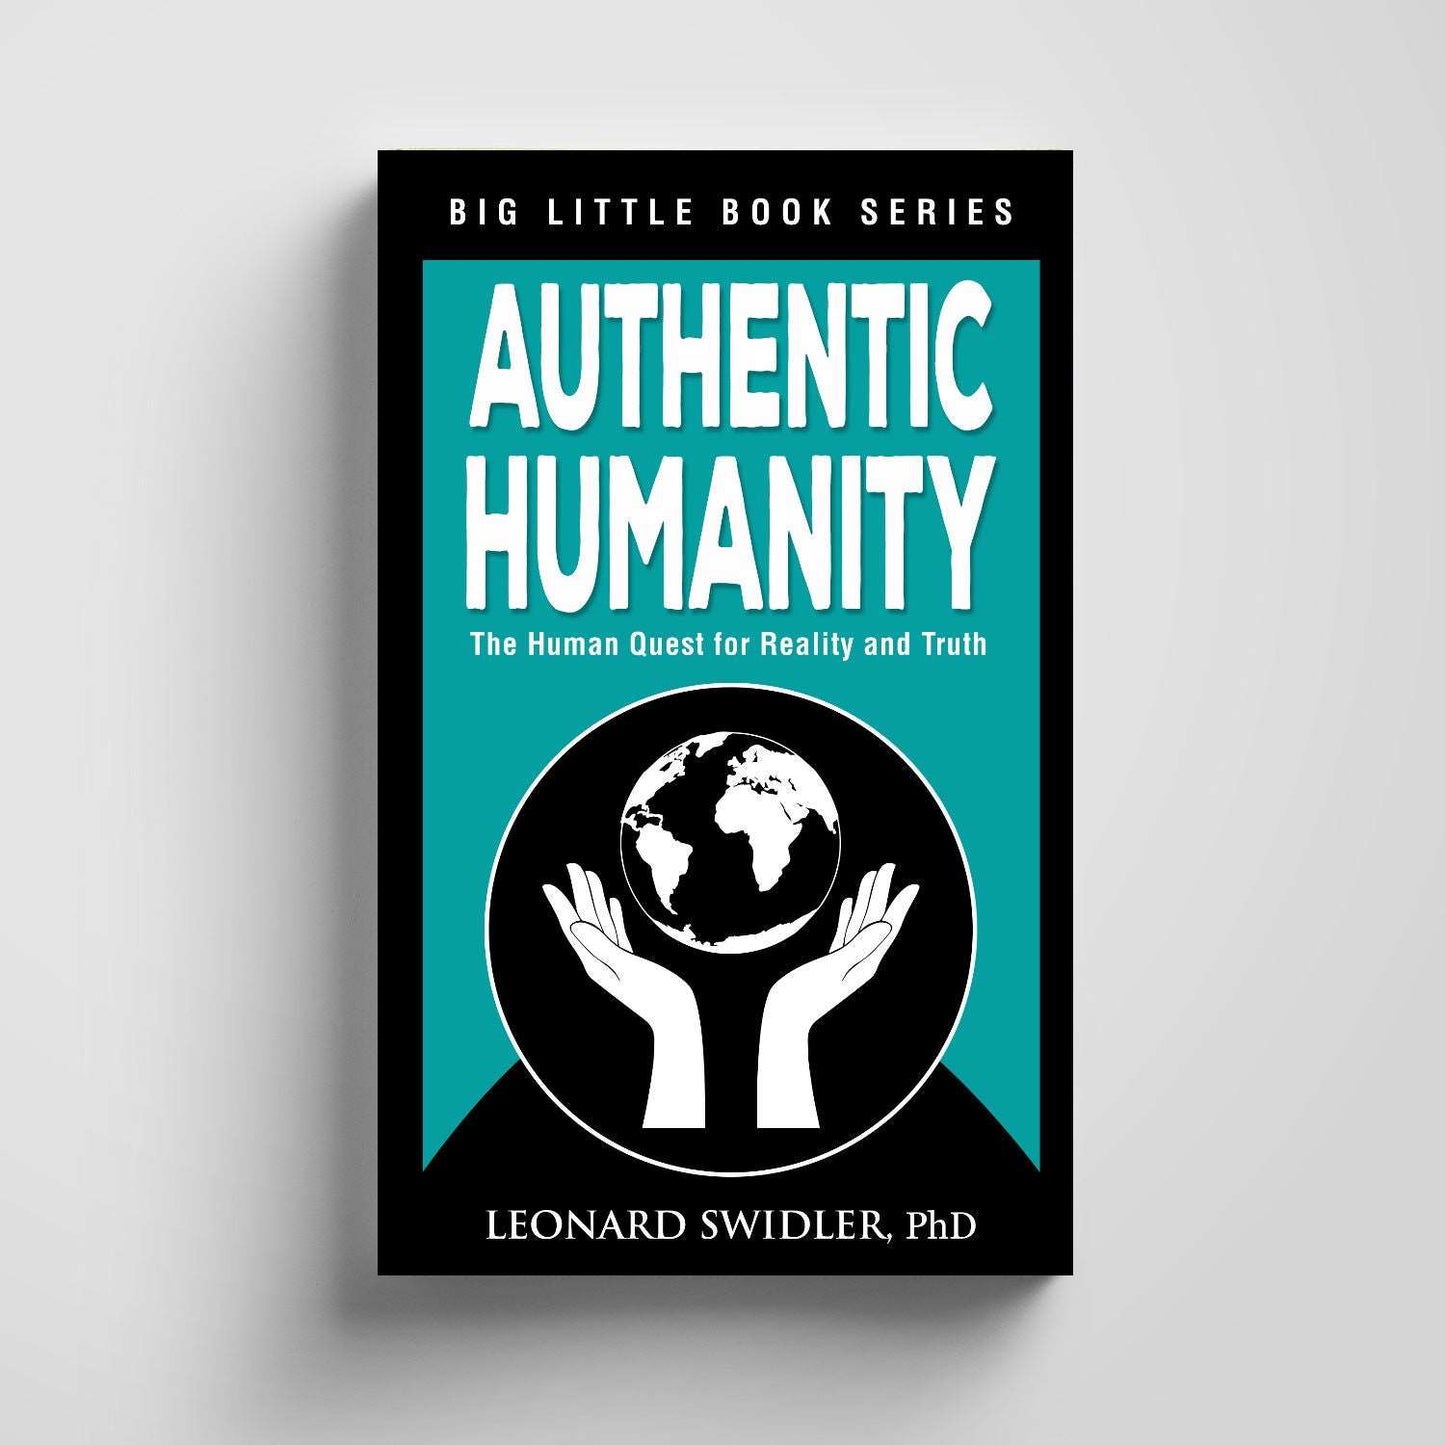 Authentic Humanity: The Human Quest for Reality and Truth (Big Little Books)